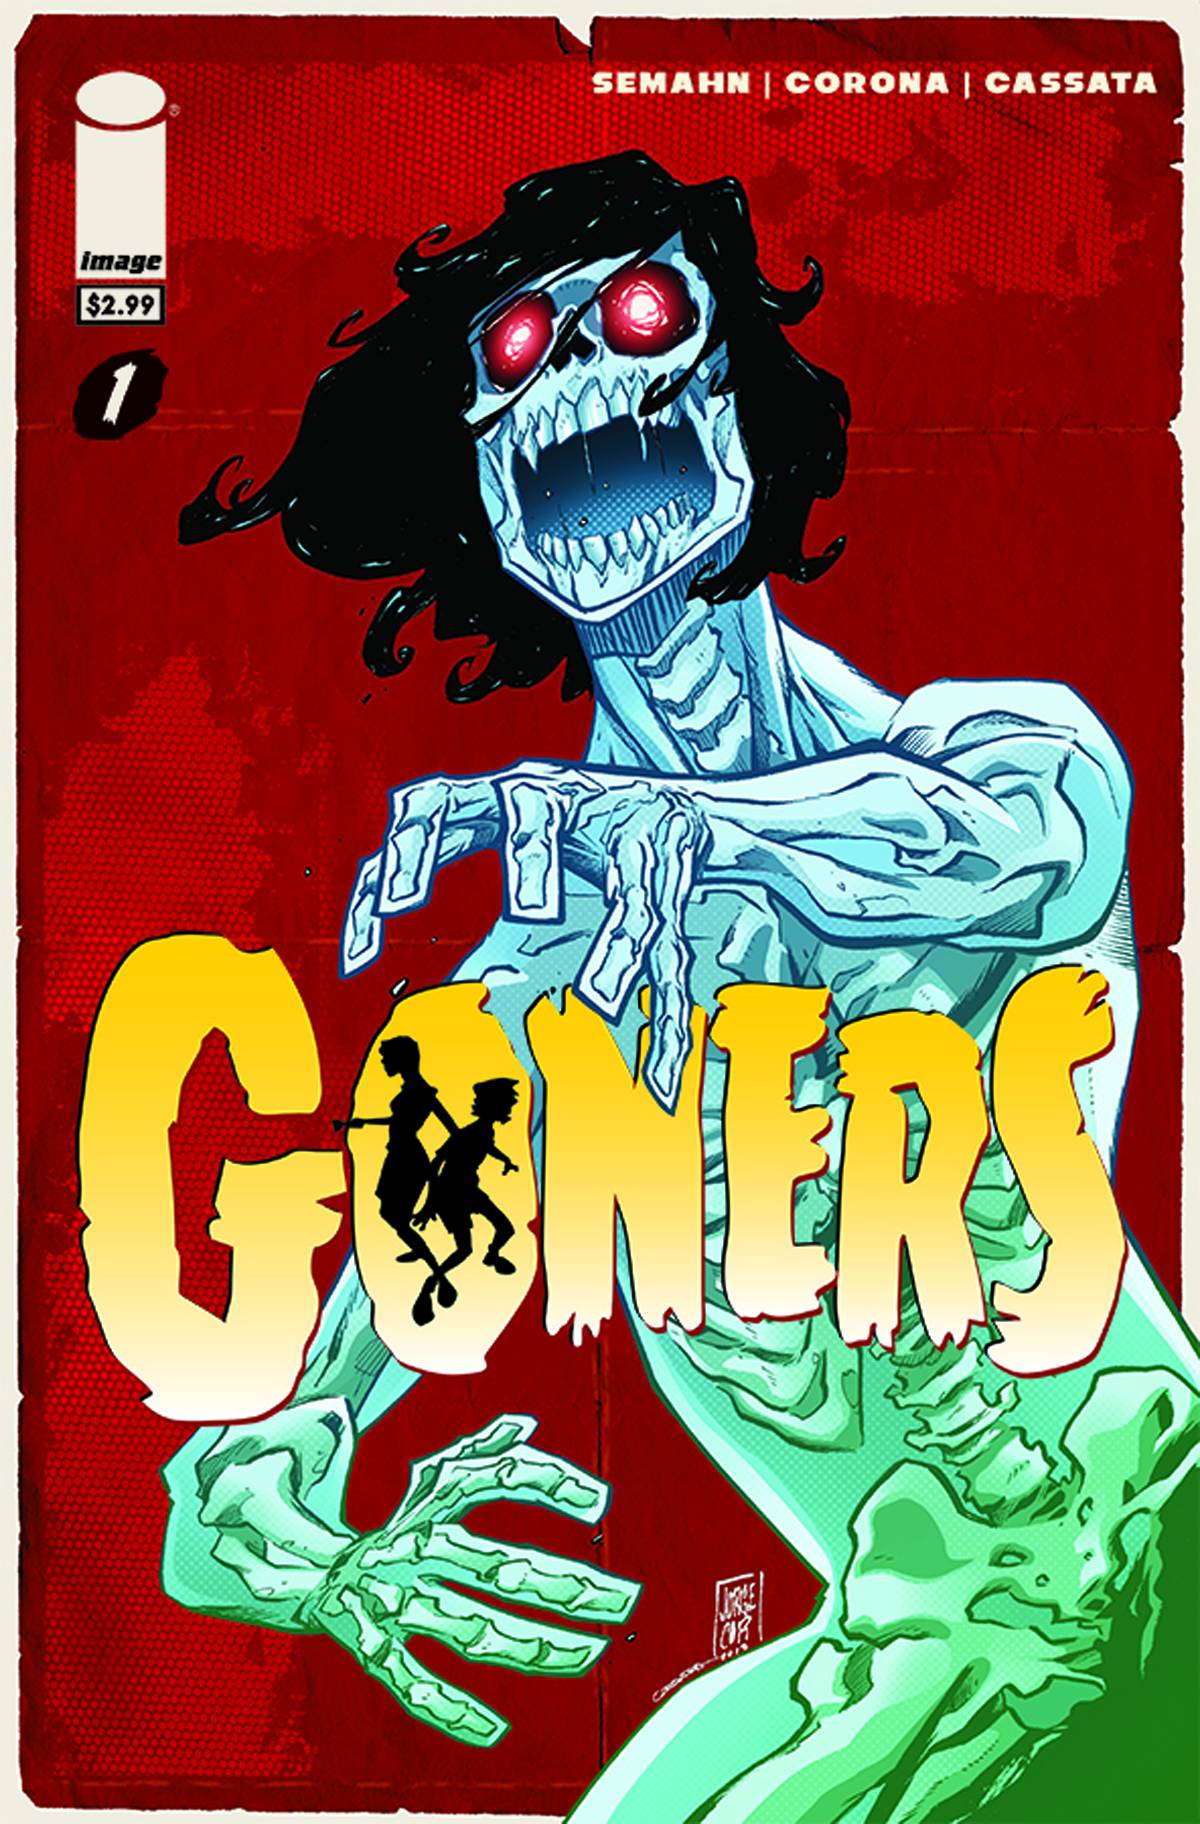 GONERS (MS 6)